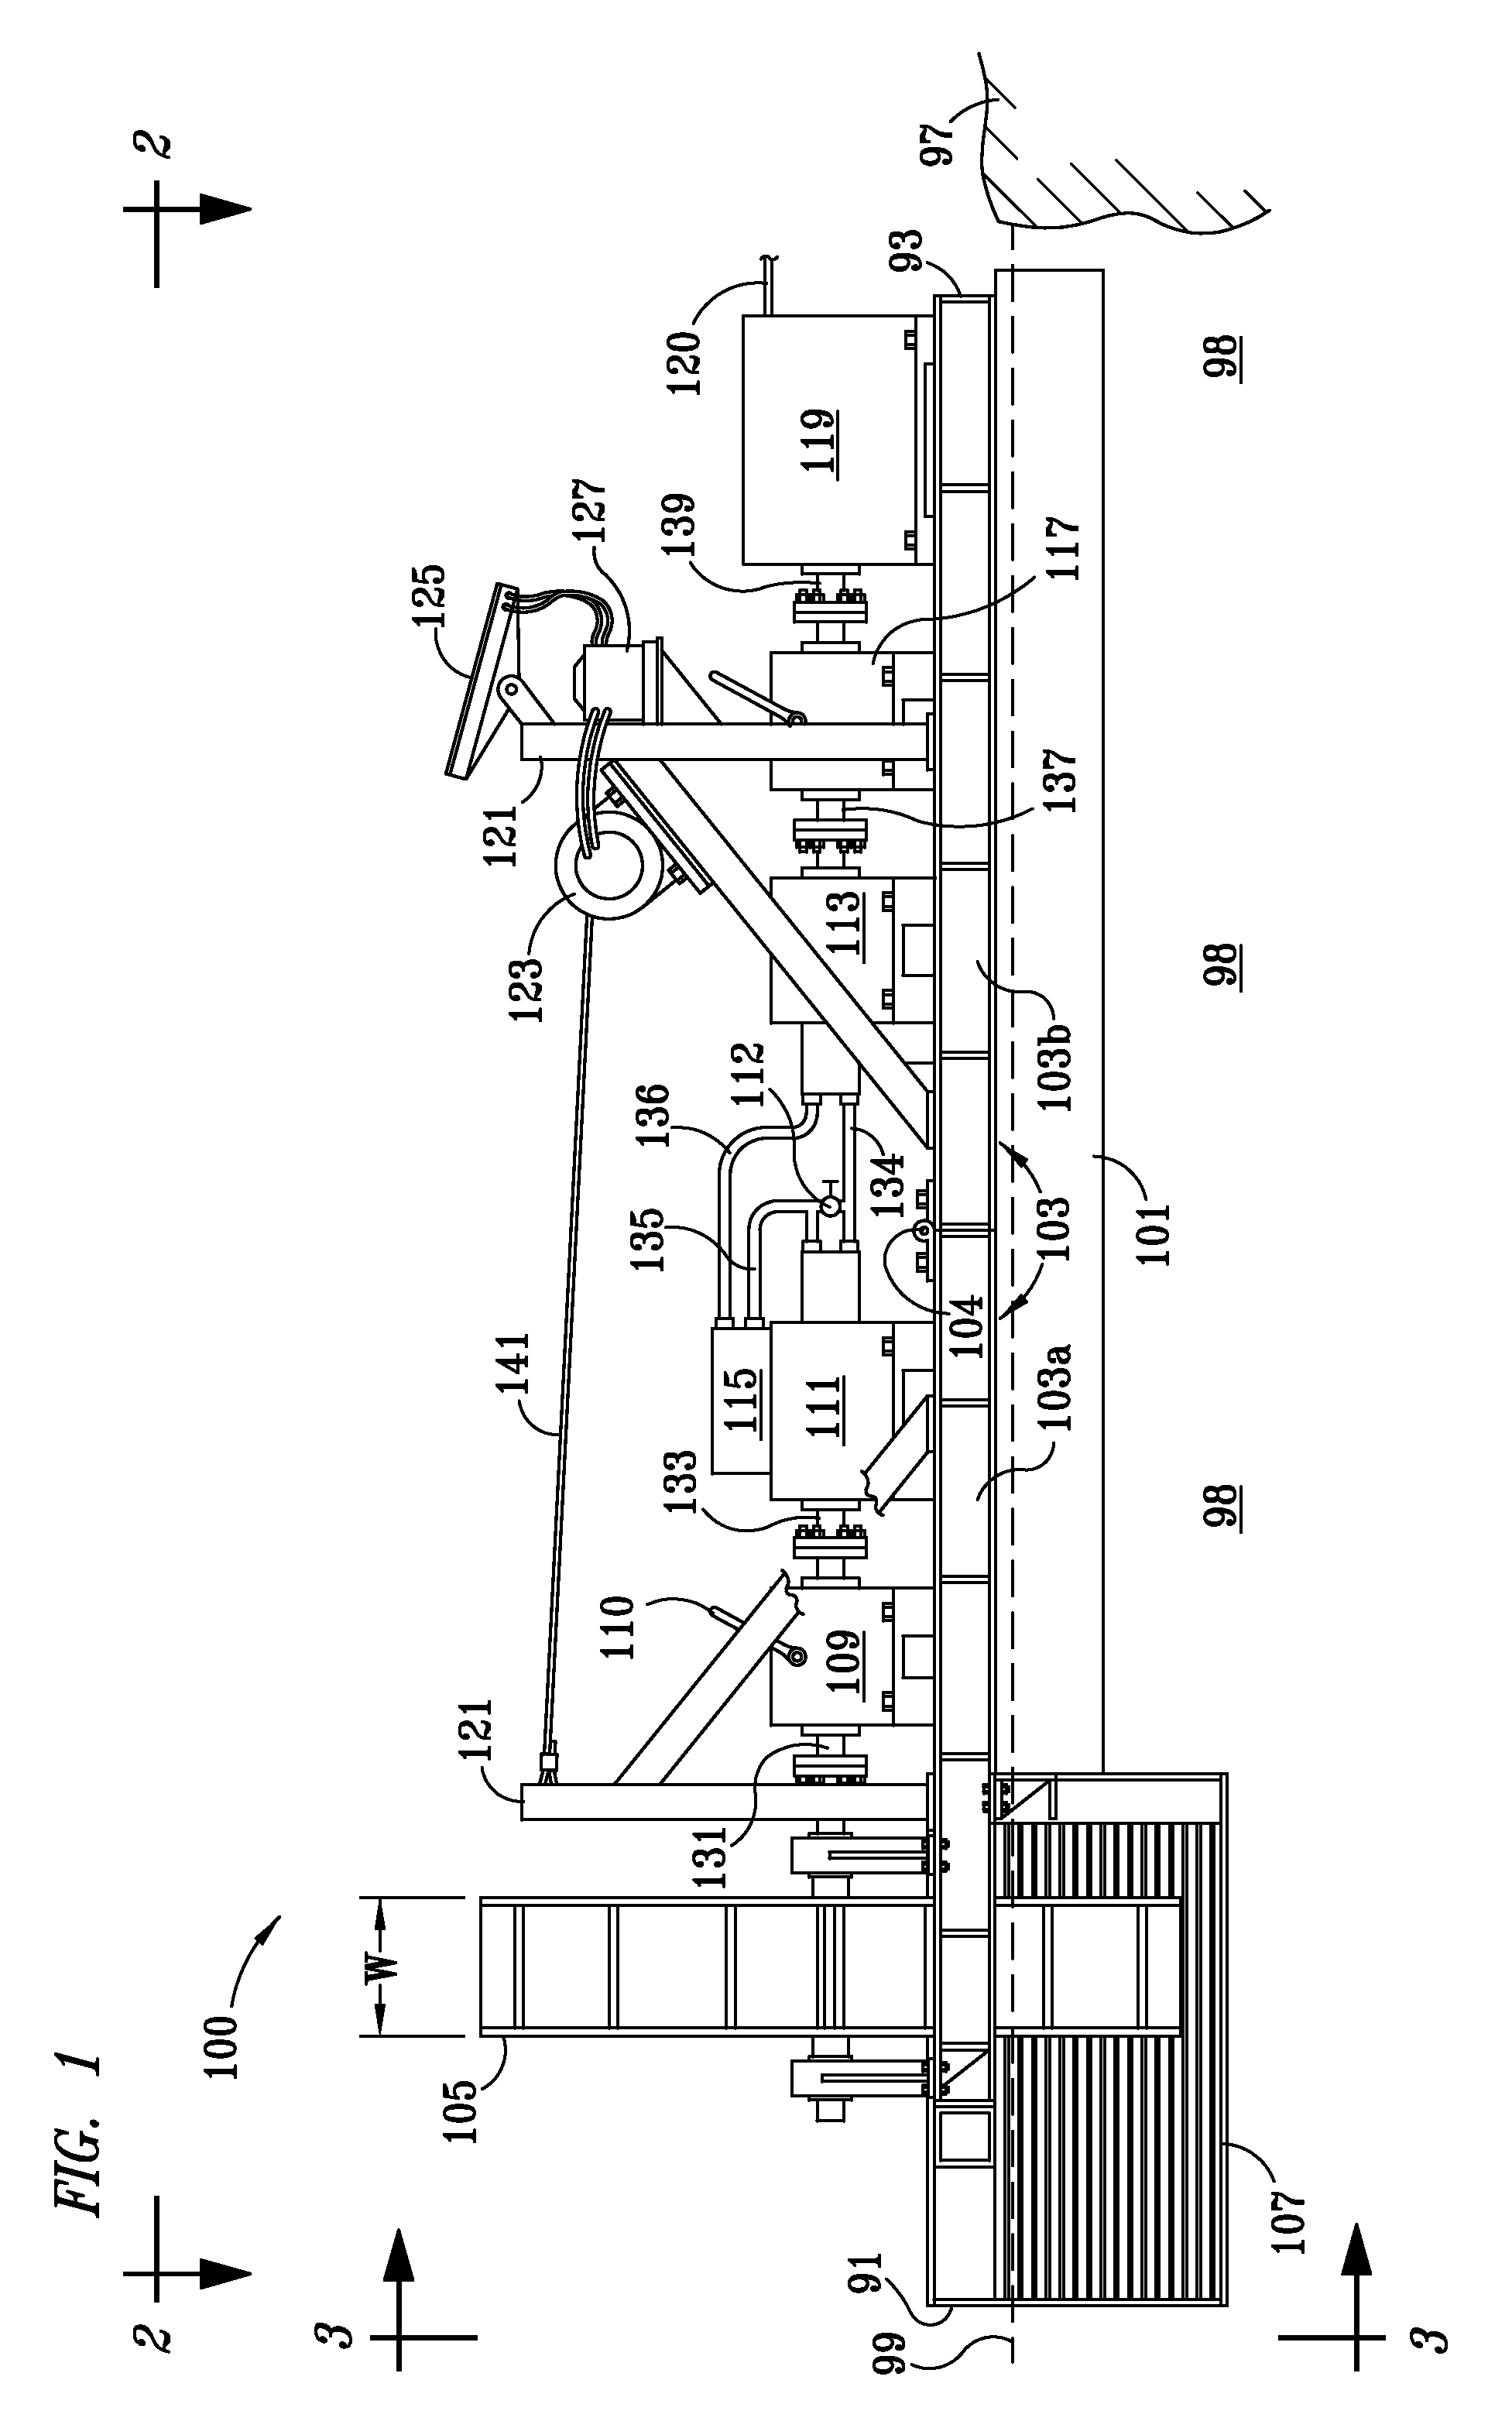 System and method for generating electricity